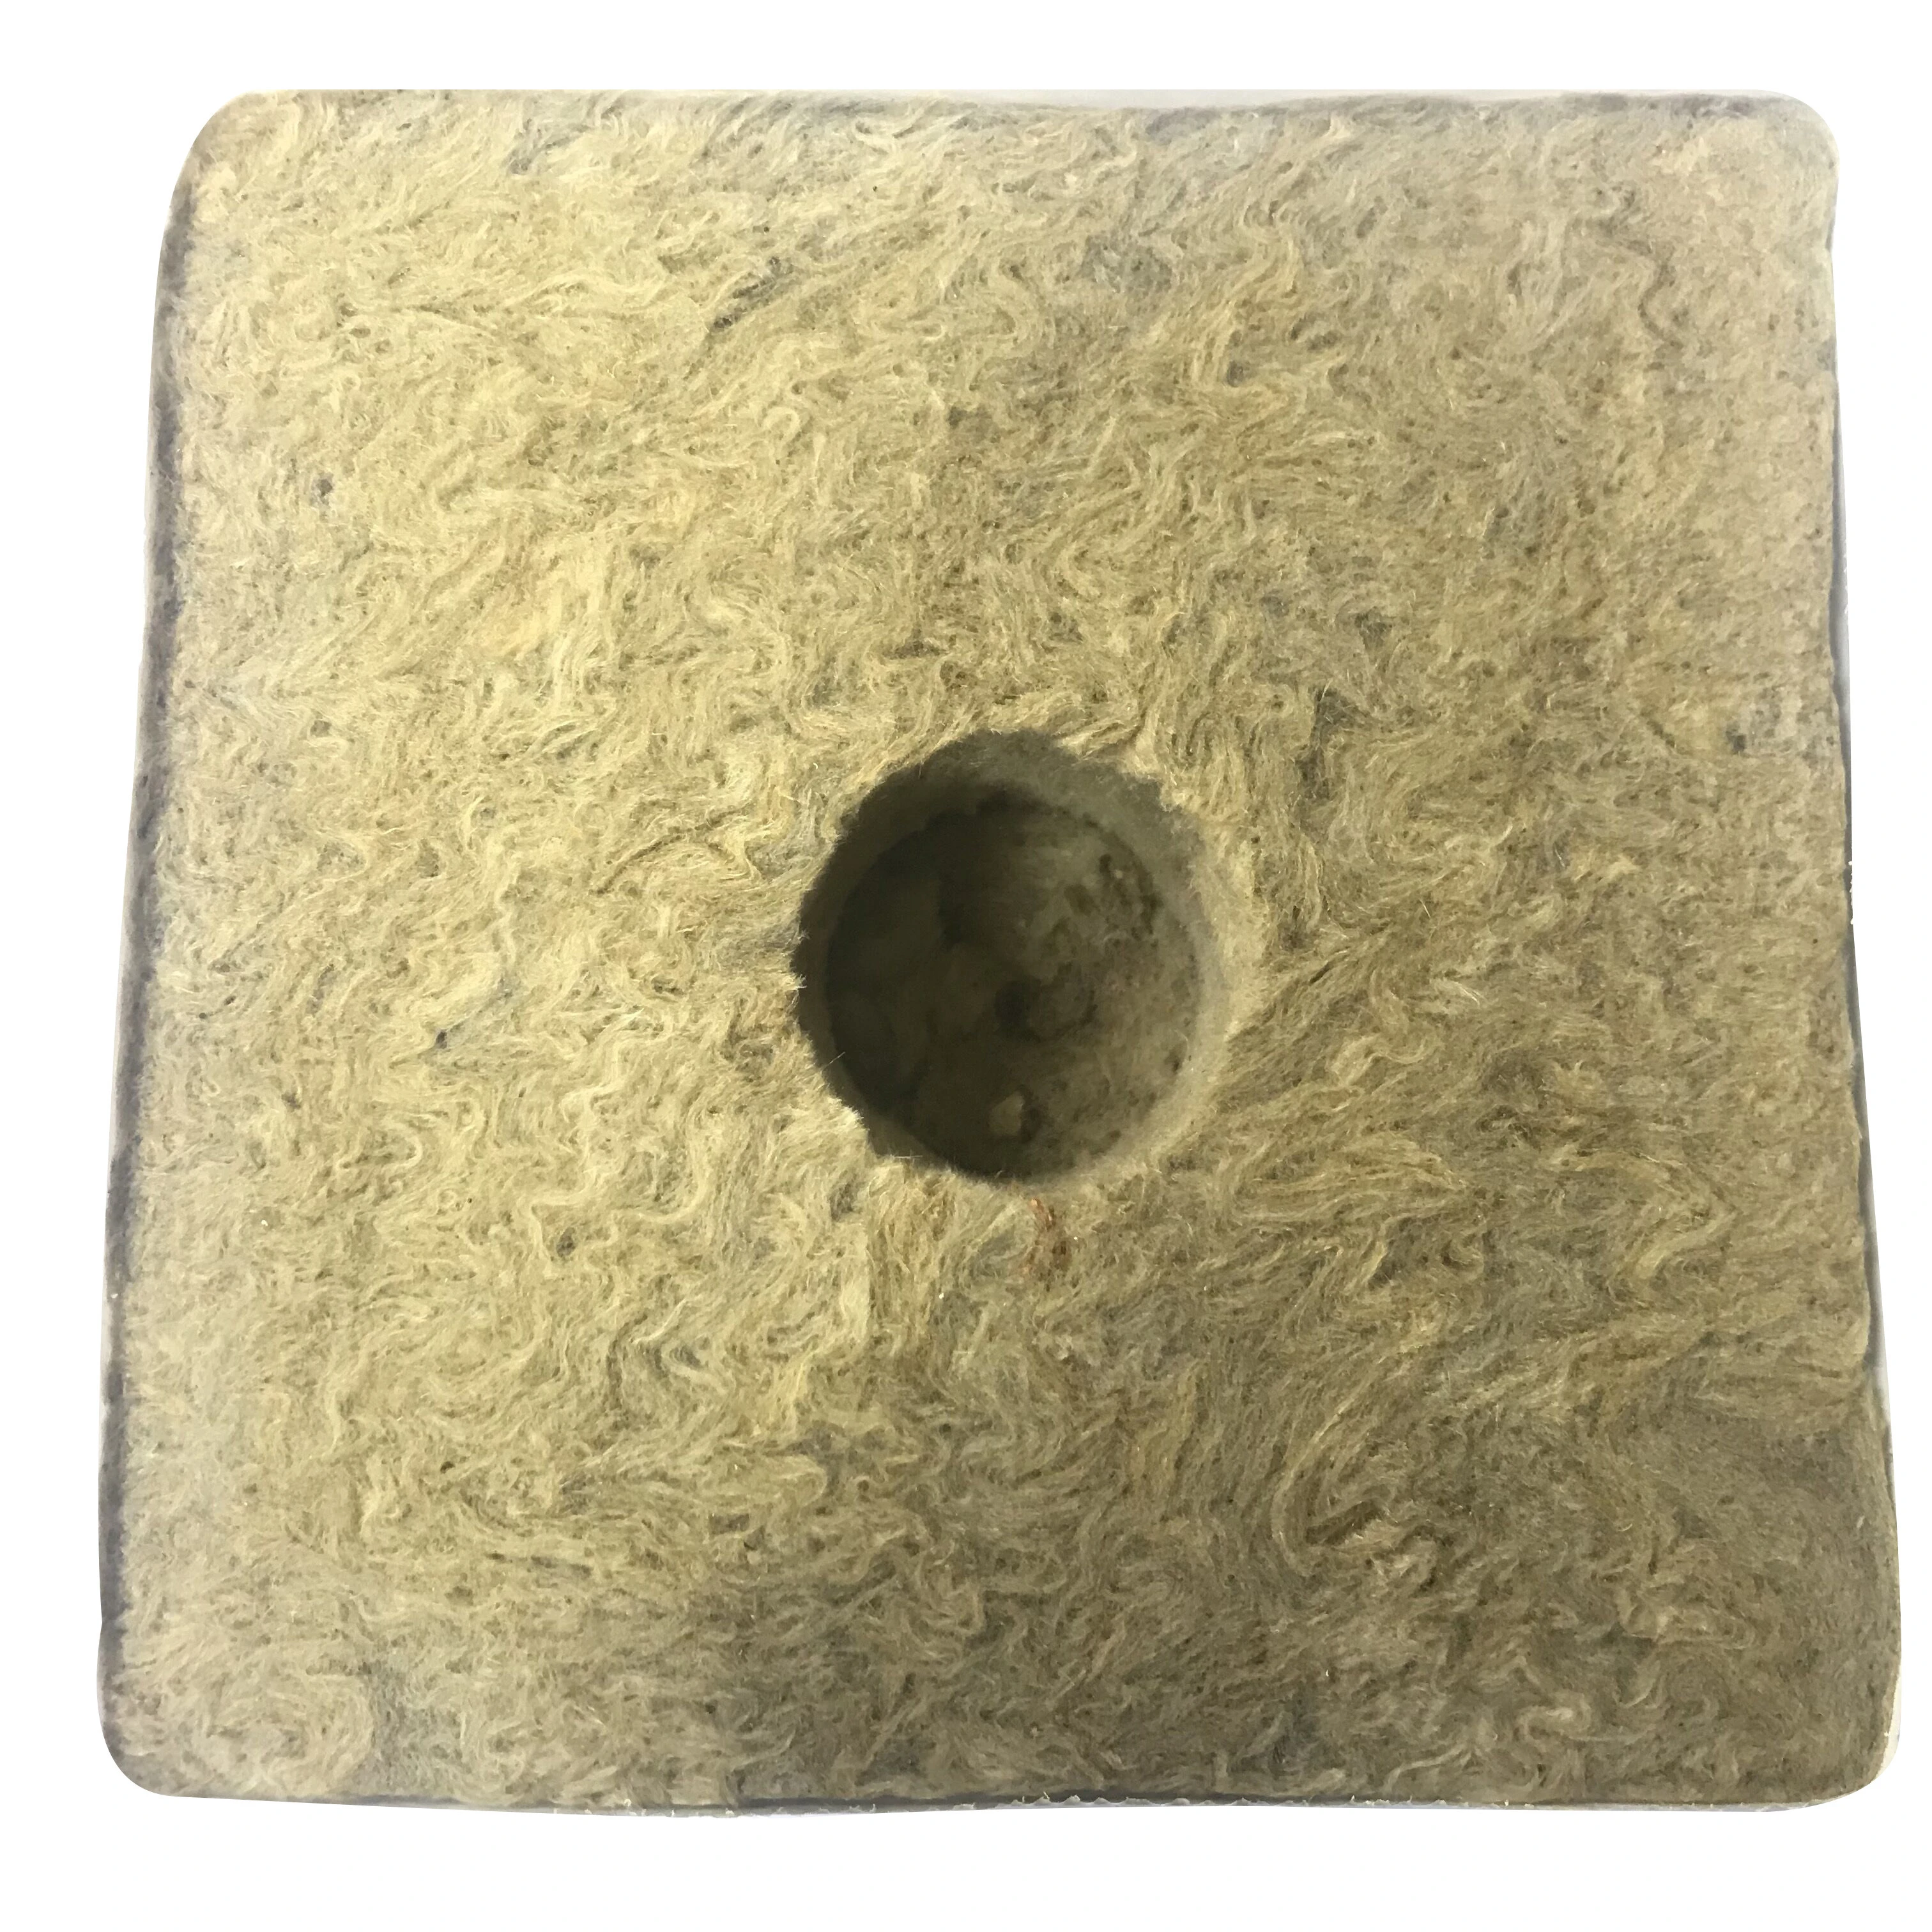 thermal insulation material hydroponic rock wool Insulation installation